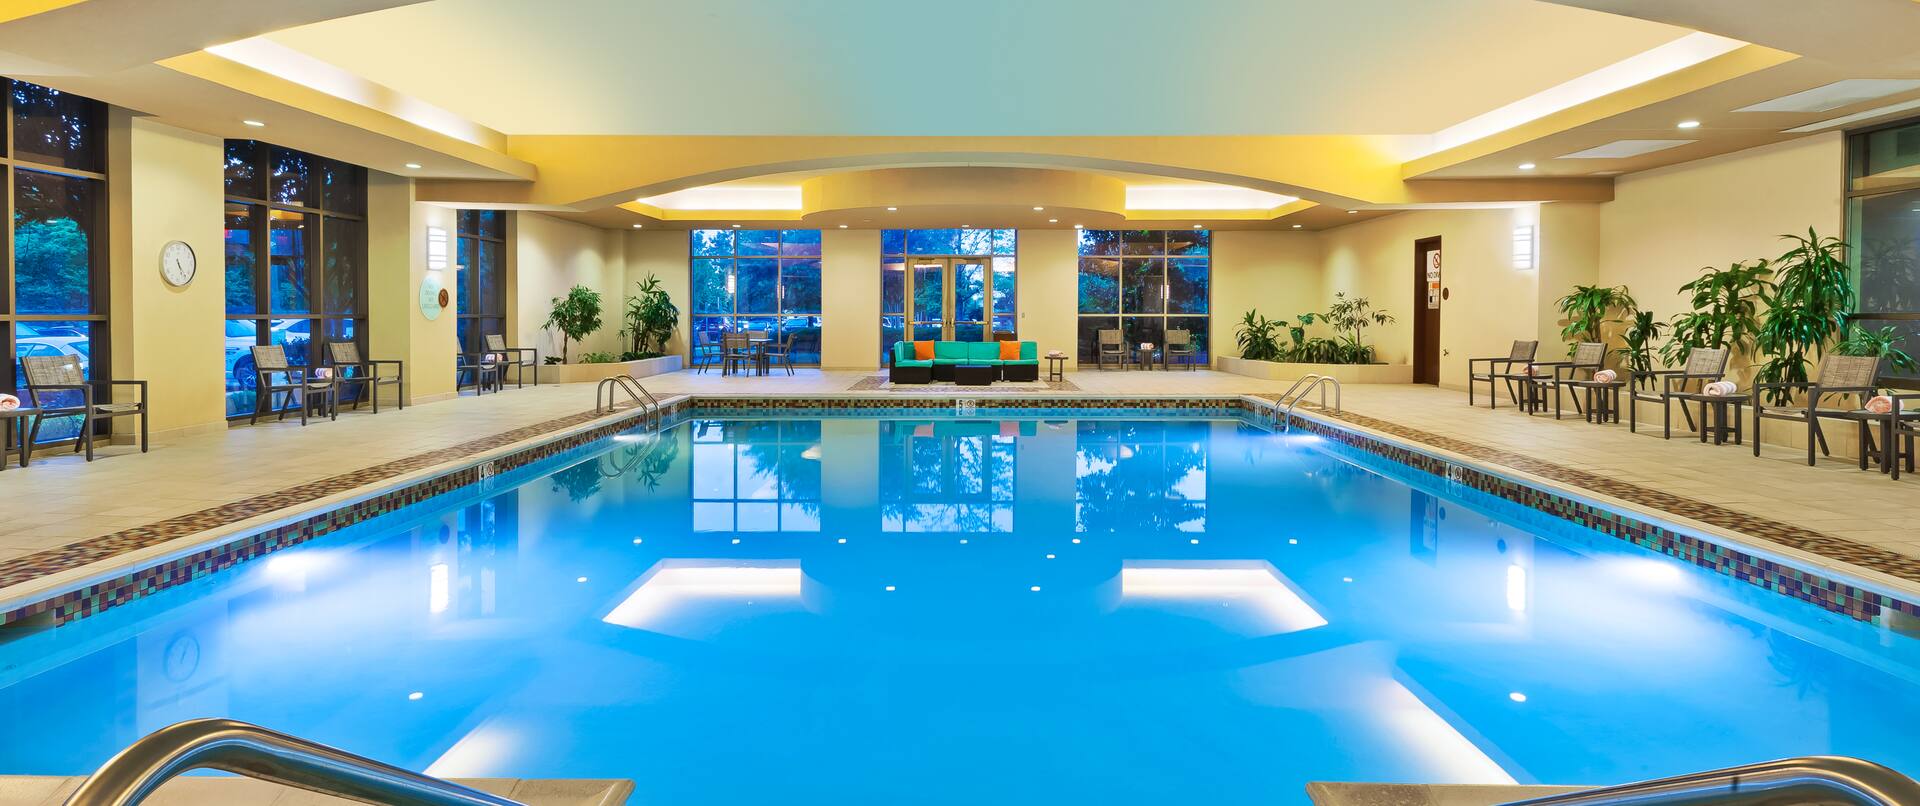 Indoor pool for year around use